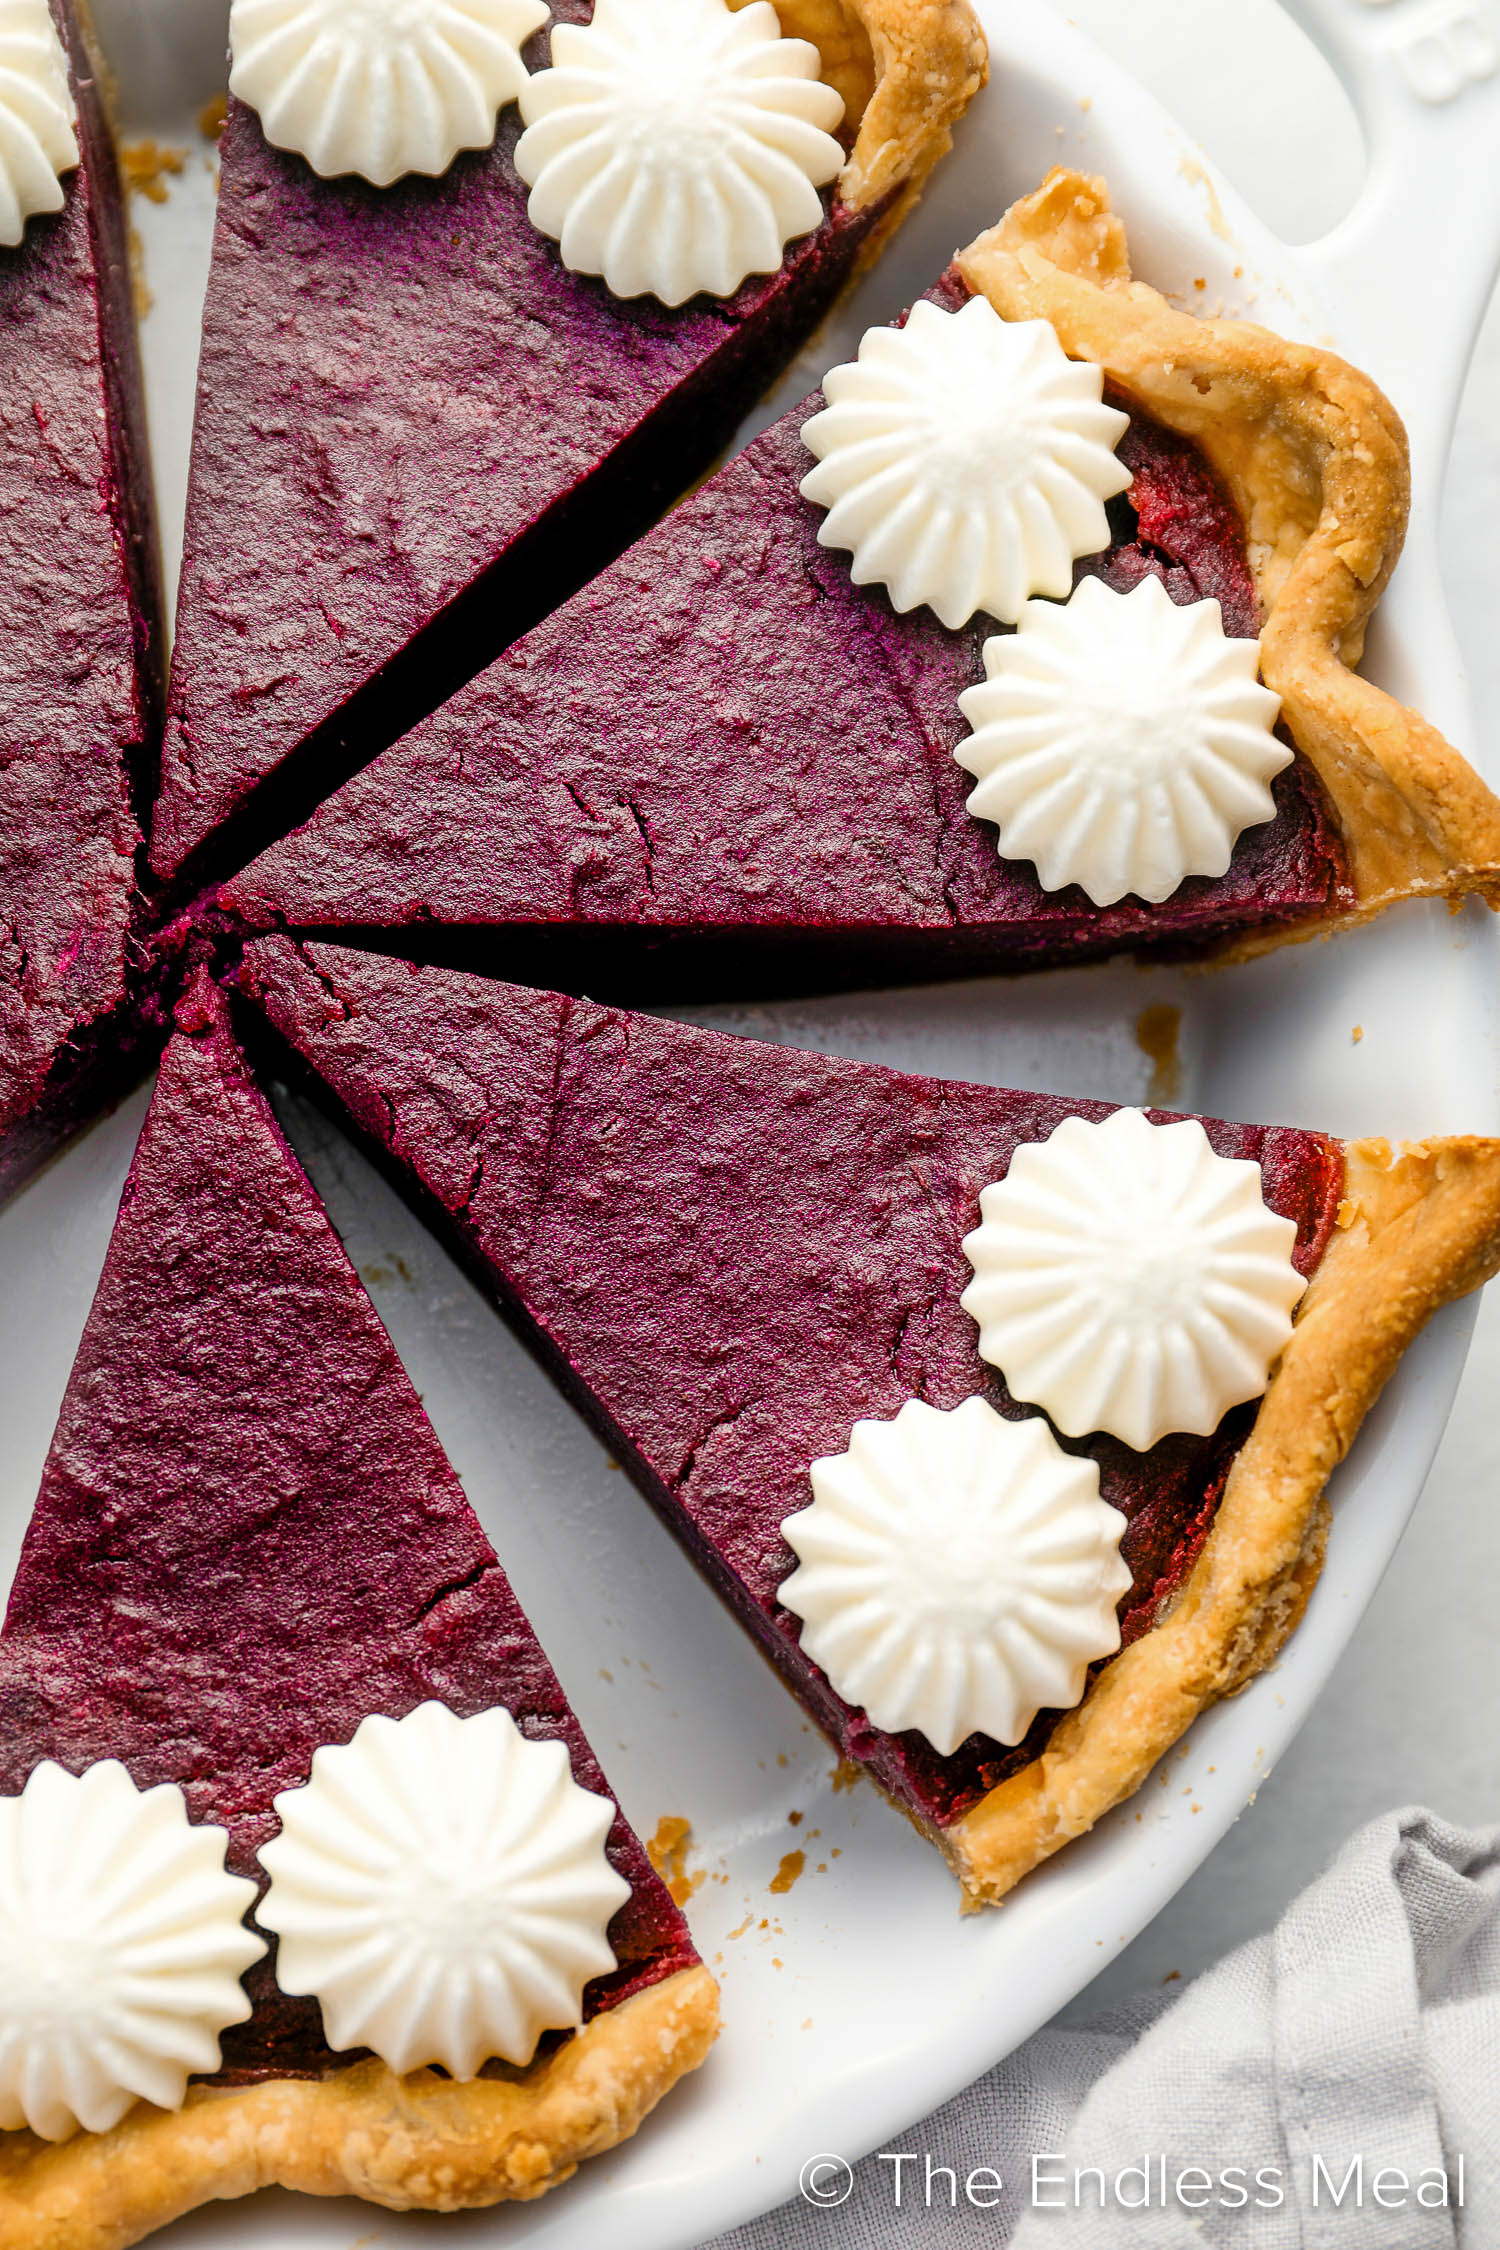 A close up of slices of Purple Sweet Potato Pie with whipped cream